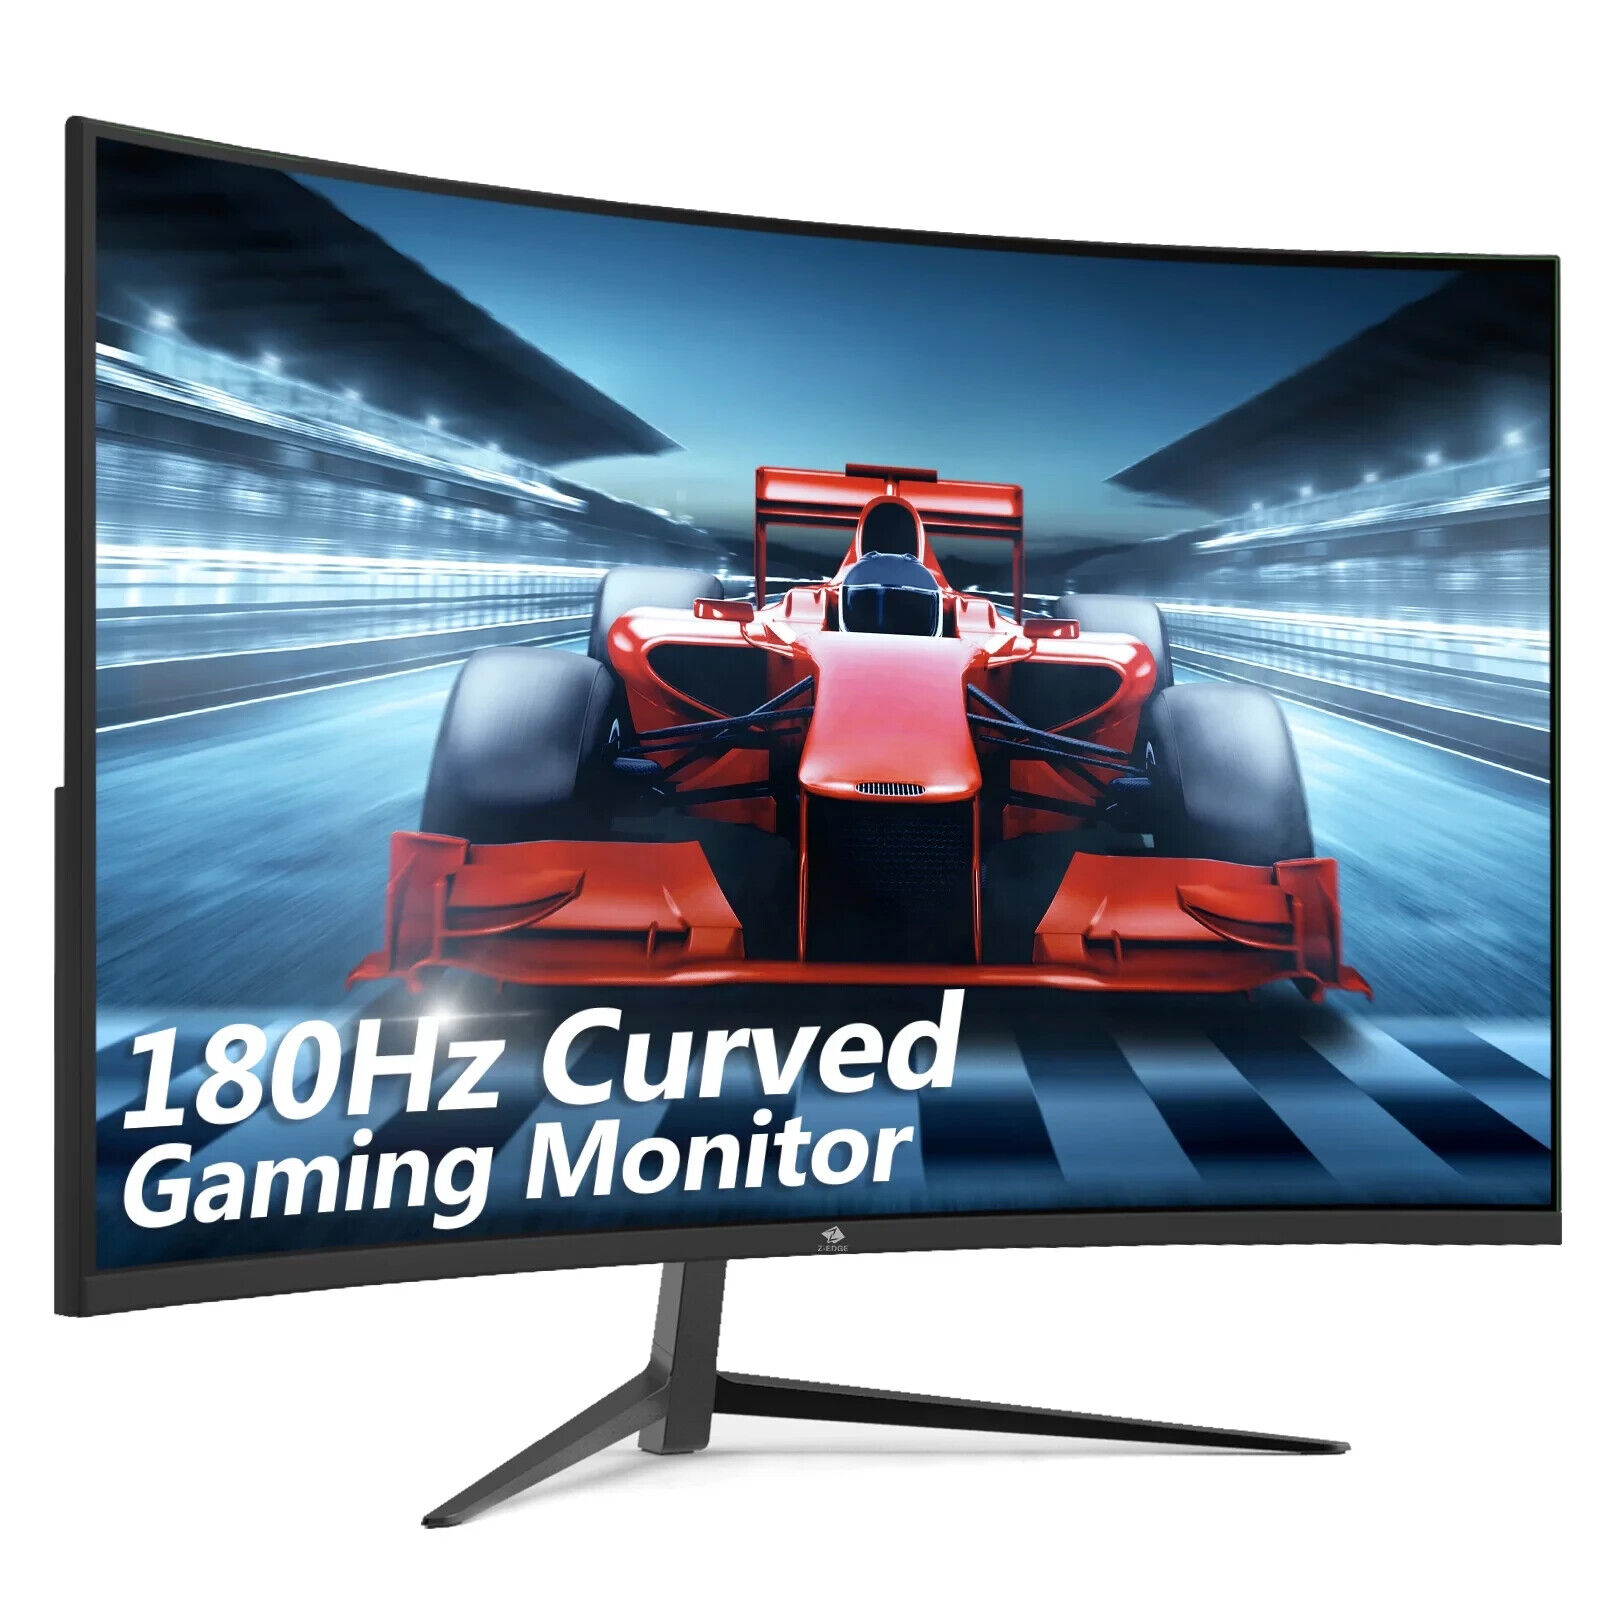 Z-Edge 24-Inch Curved Gaming Monitor 180Hz Refresh Rate, 1Ms MPRT, FHD 1080 Gami